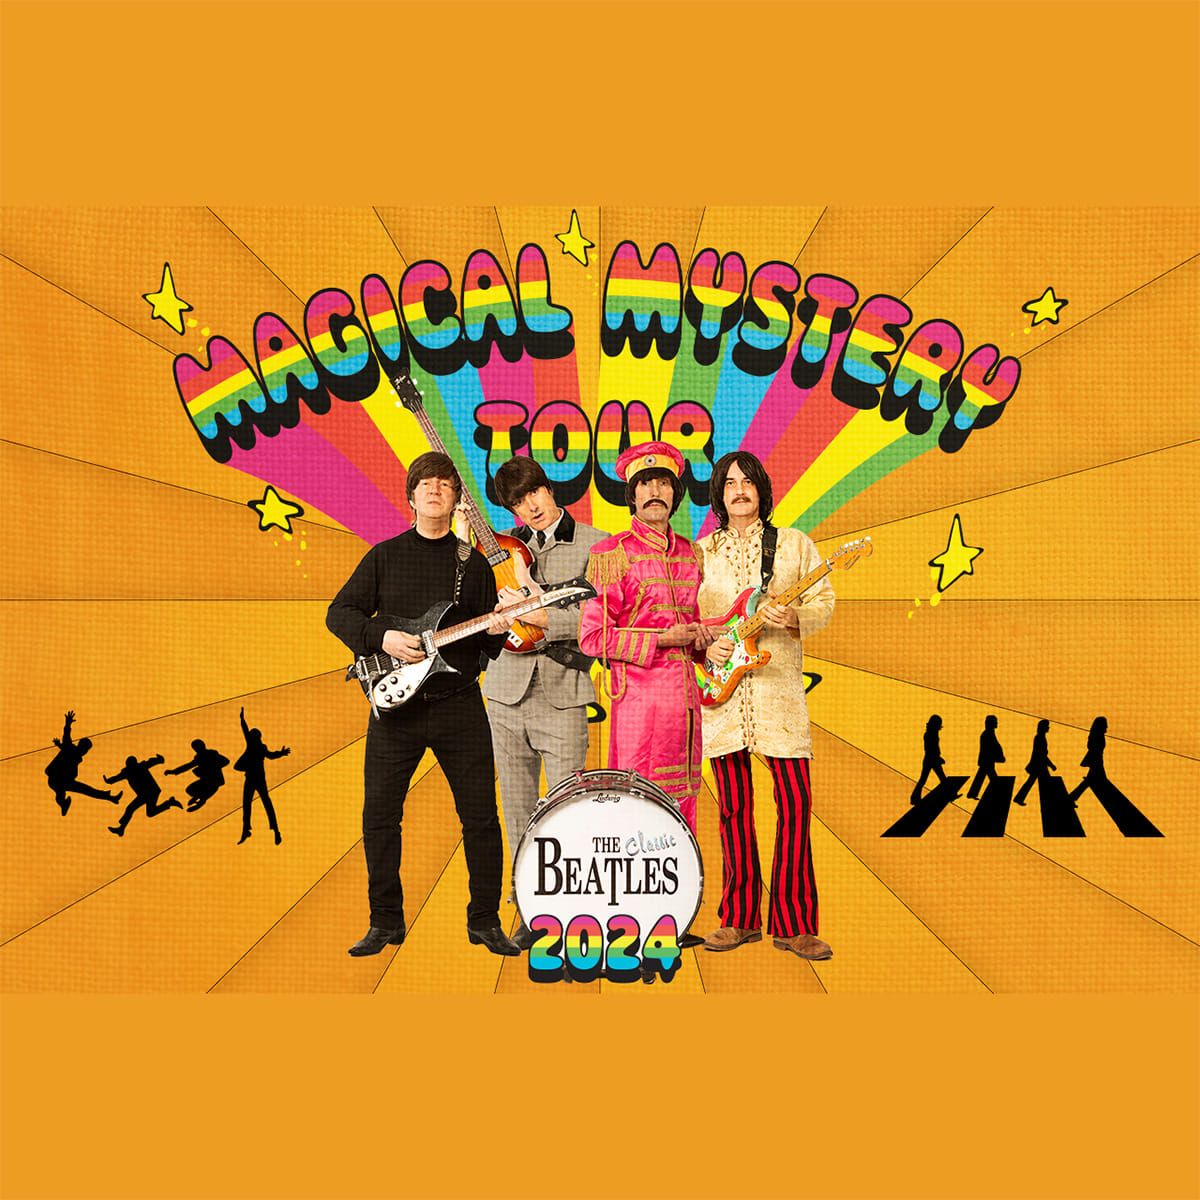 The Classic Beatles\nMagical Mystery Tour Friday 5th July 2024 